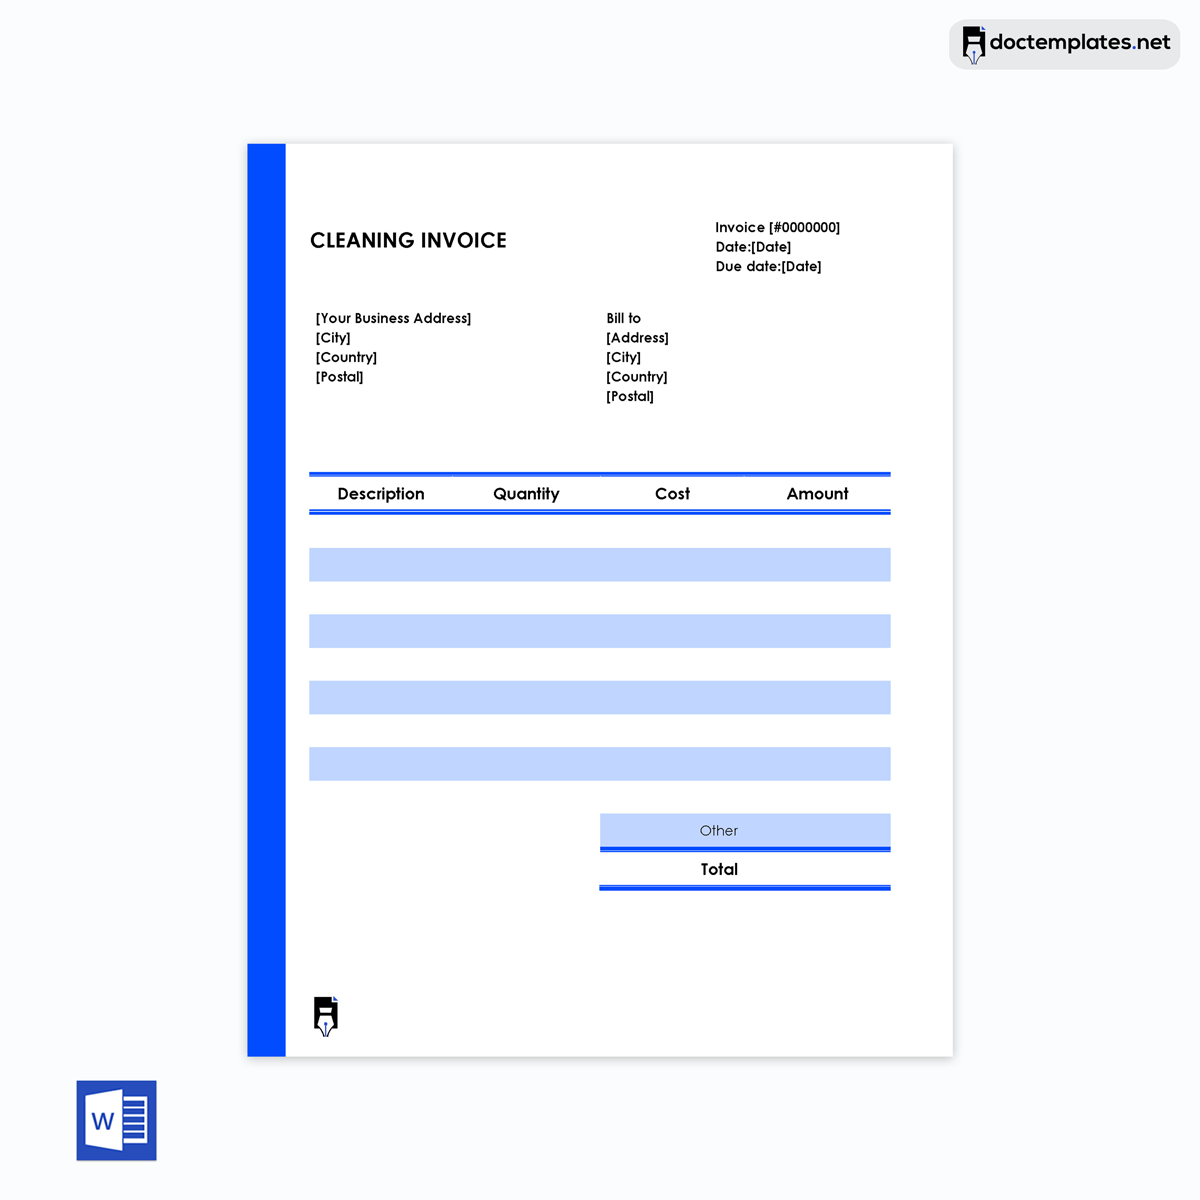 Fake cleaning invoice-04 